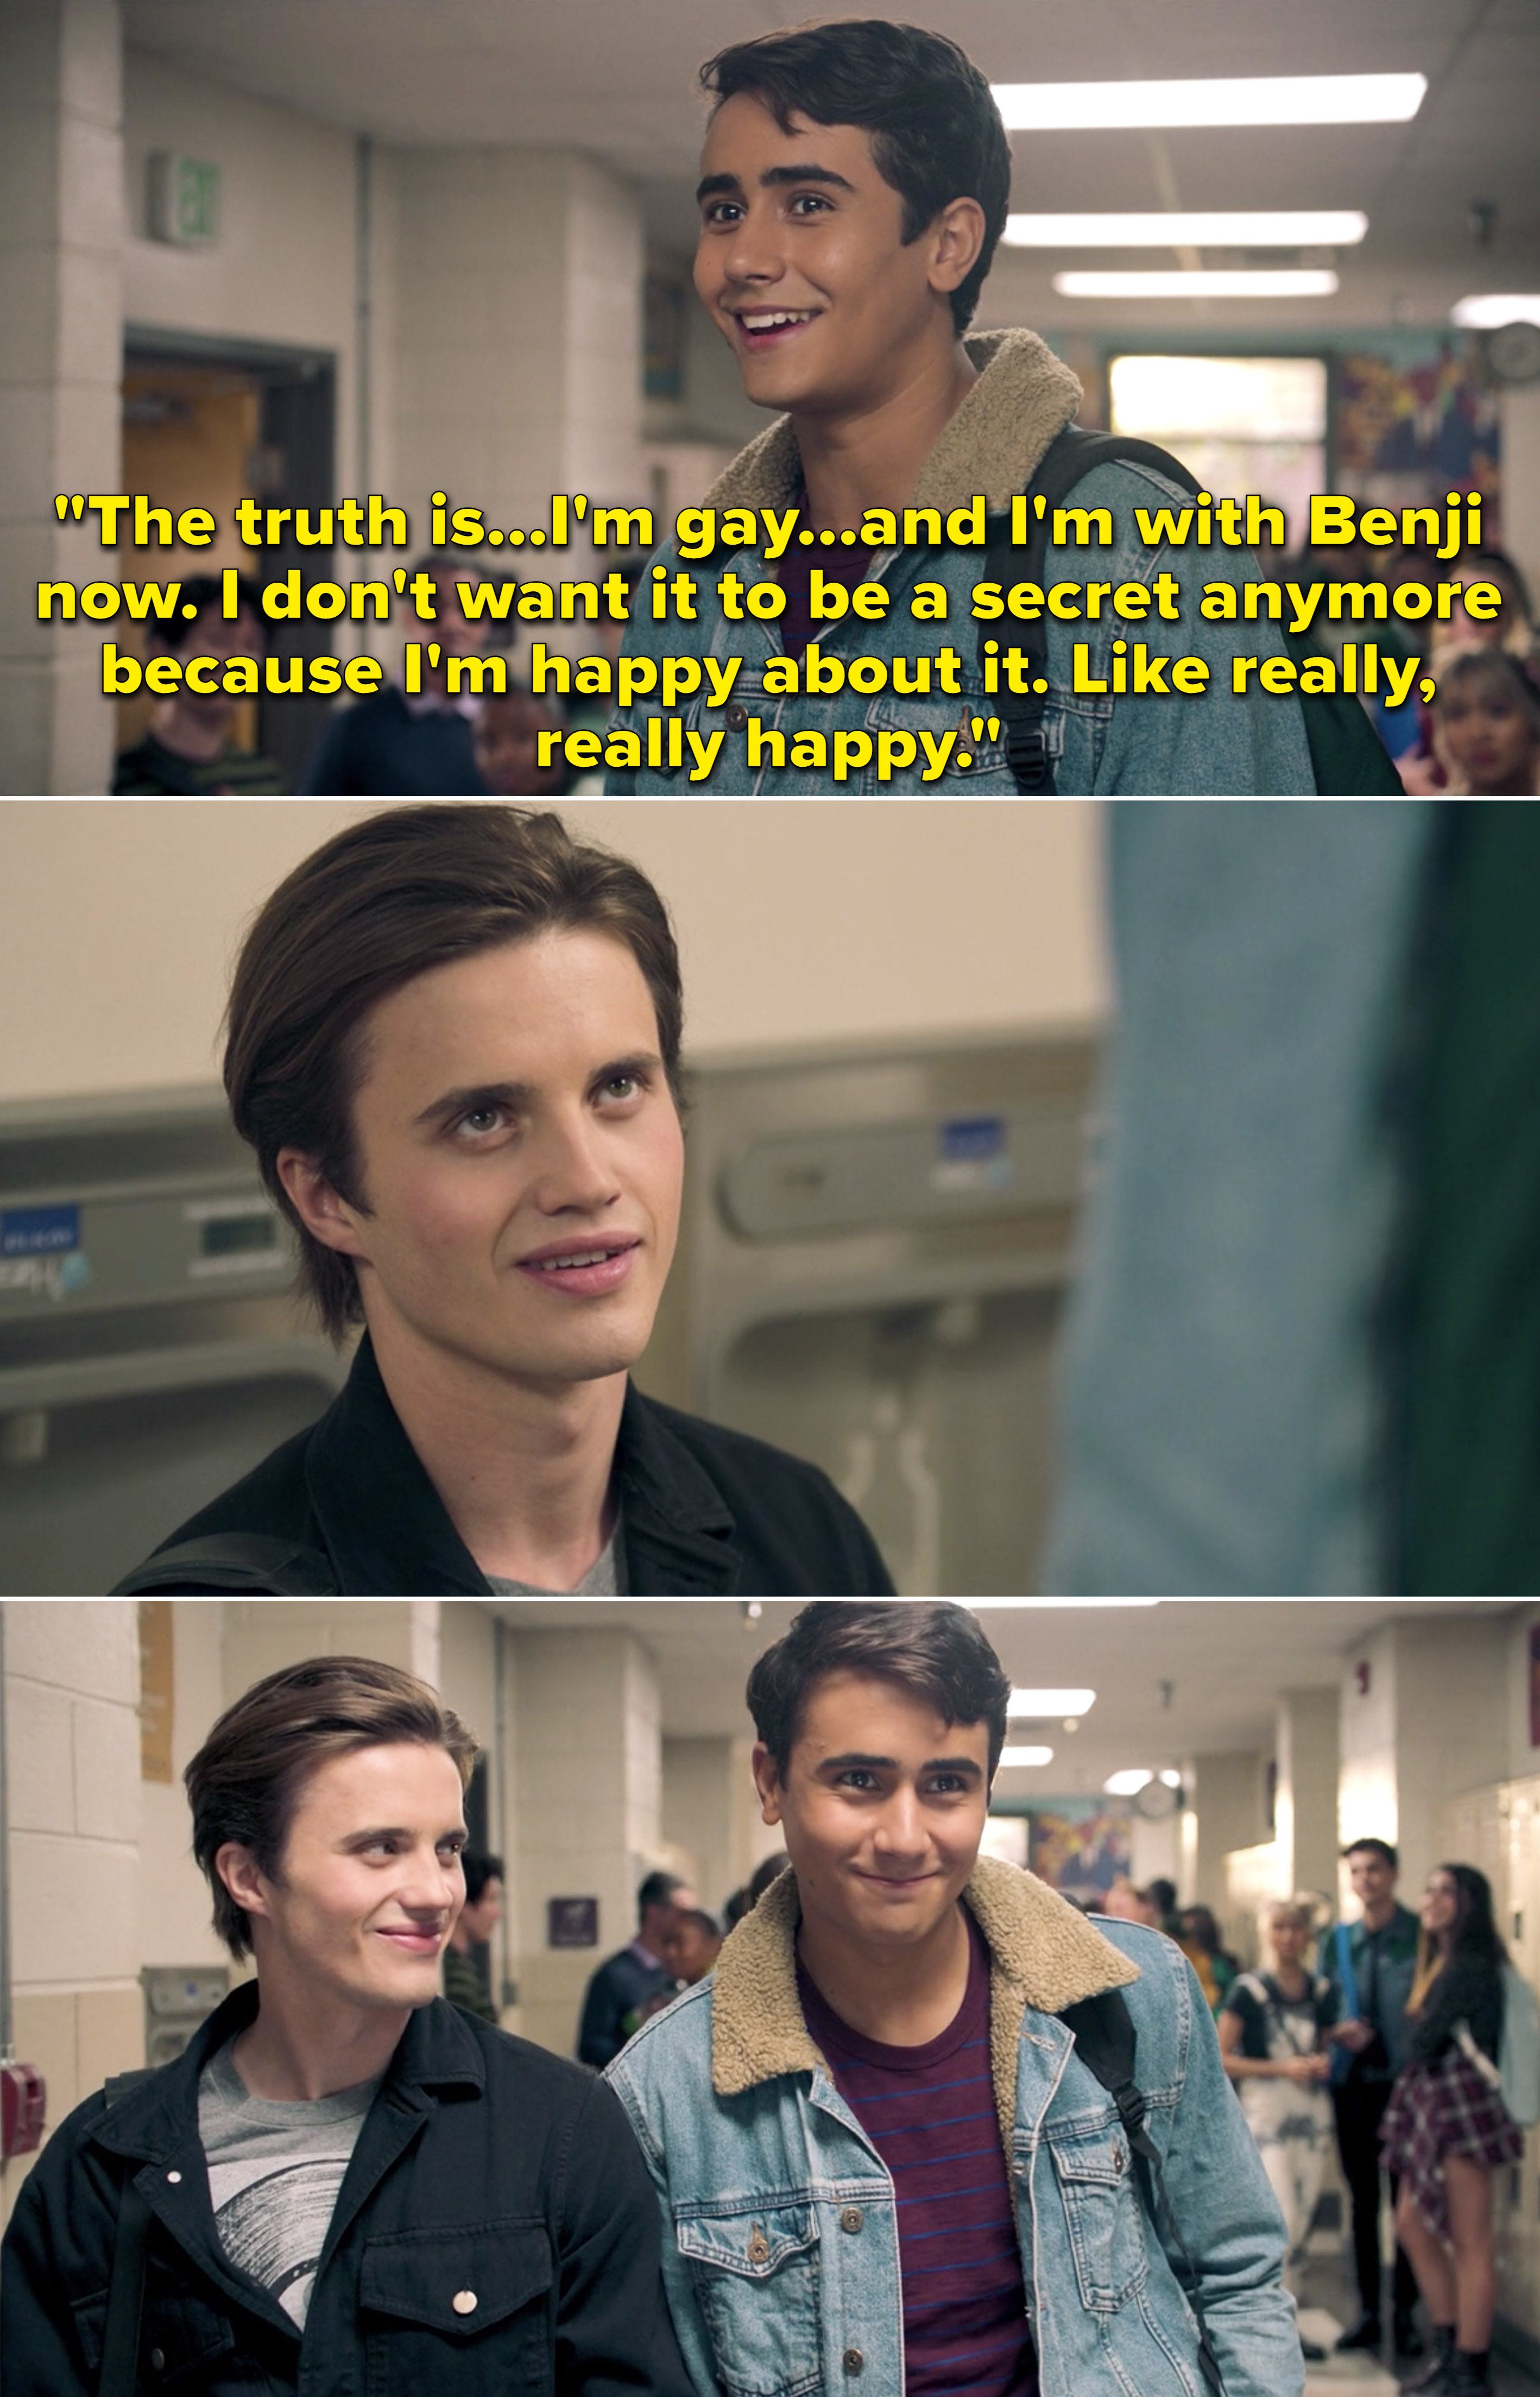 Victor telling everyone in the hallway, &quot;The truth is I&#x27;m gay, and I&#x27;m with Benji now&quot; and that he&#x27;s really happy